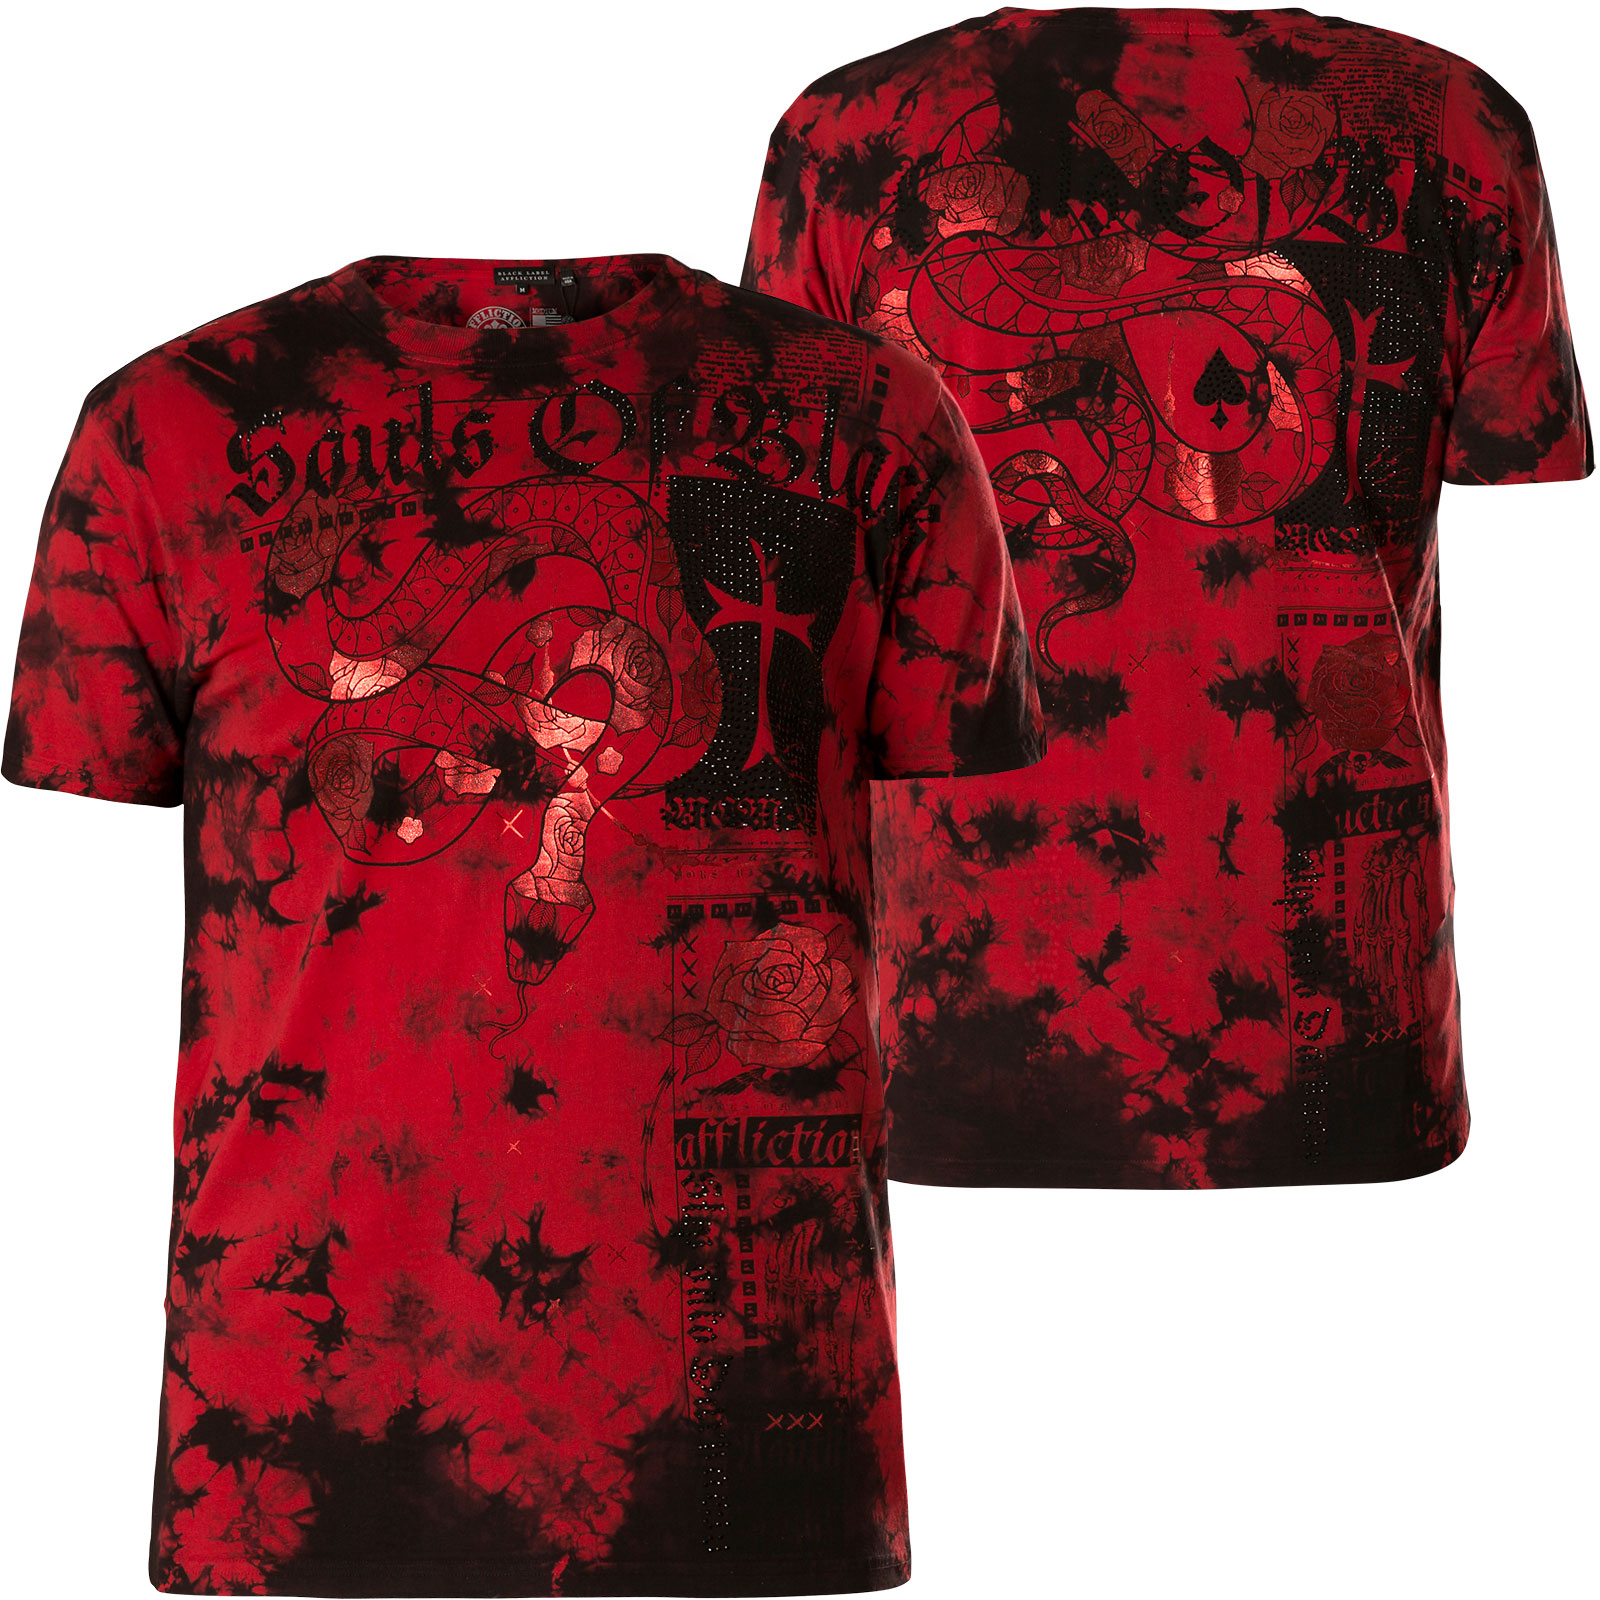 black t shirt with red print